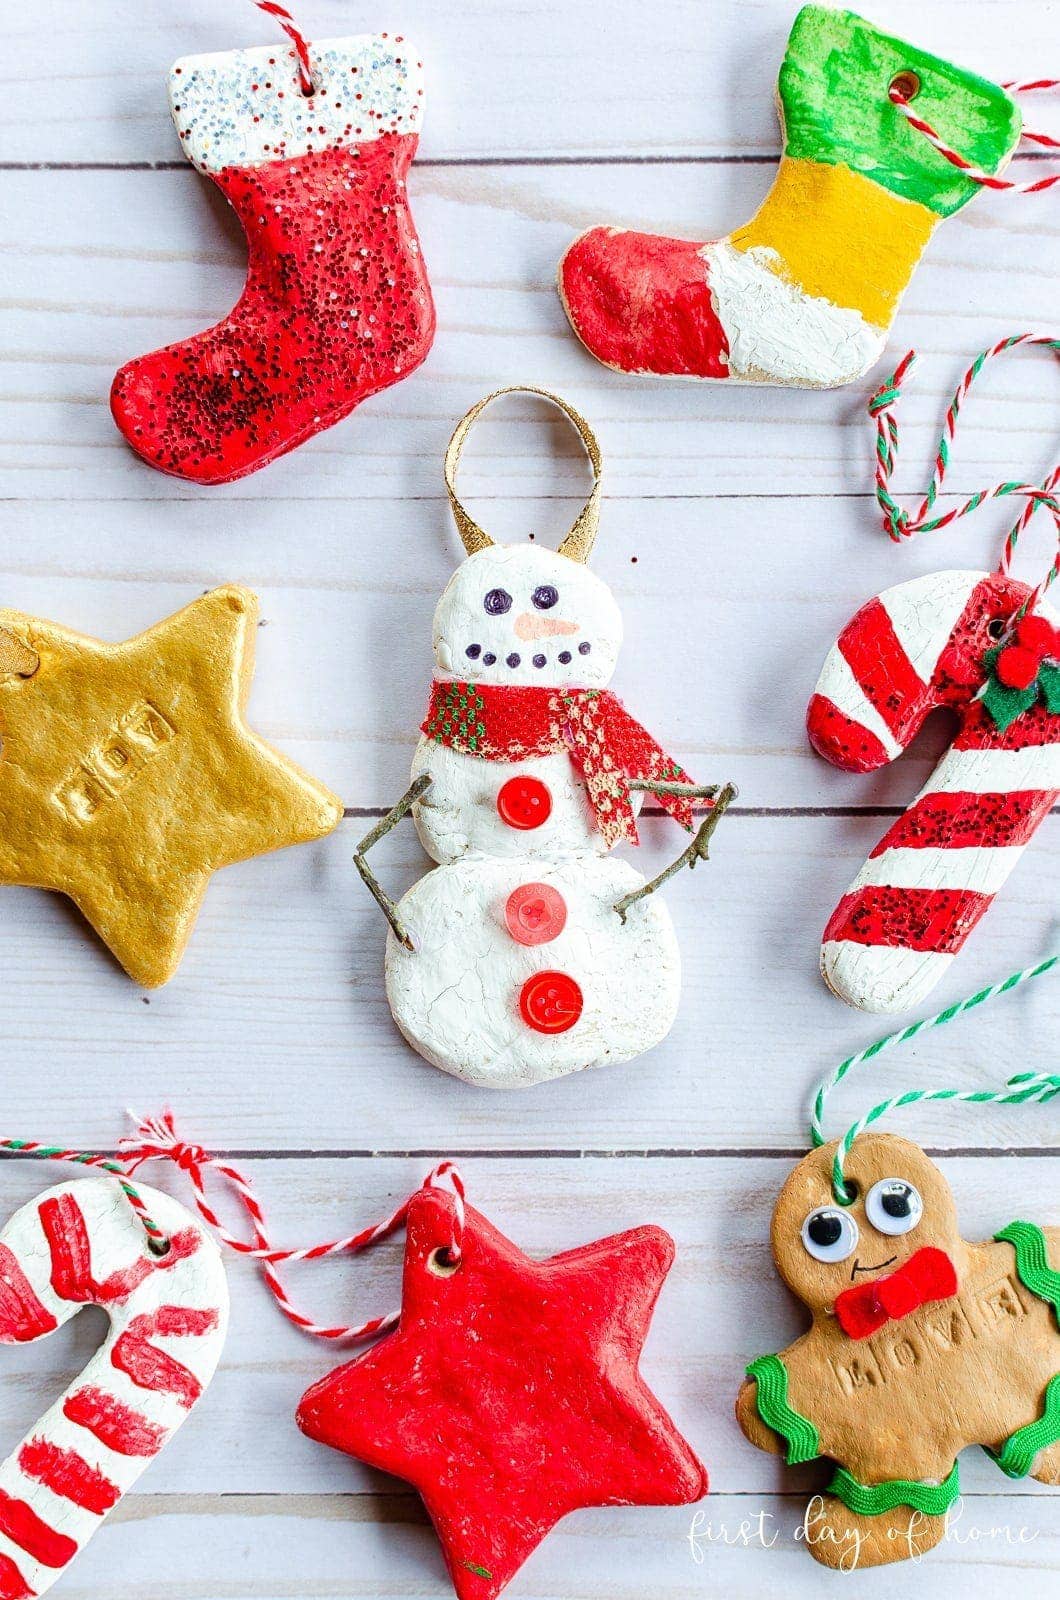 Colorful salt dough ornaments made from simple 3-ingredient salt dough recipe made for kids.